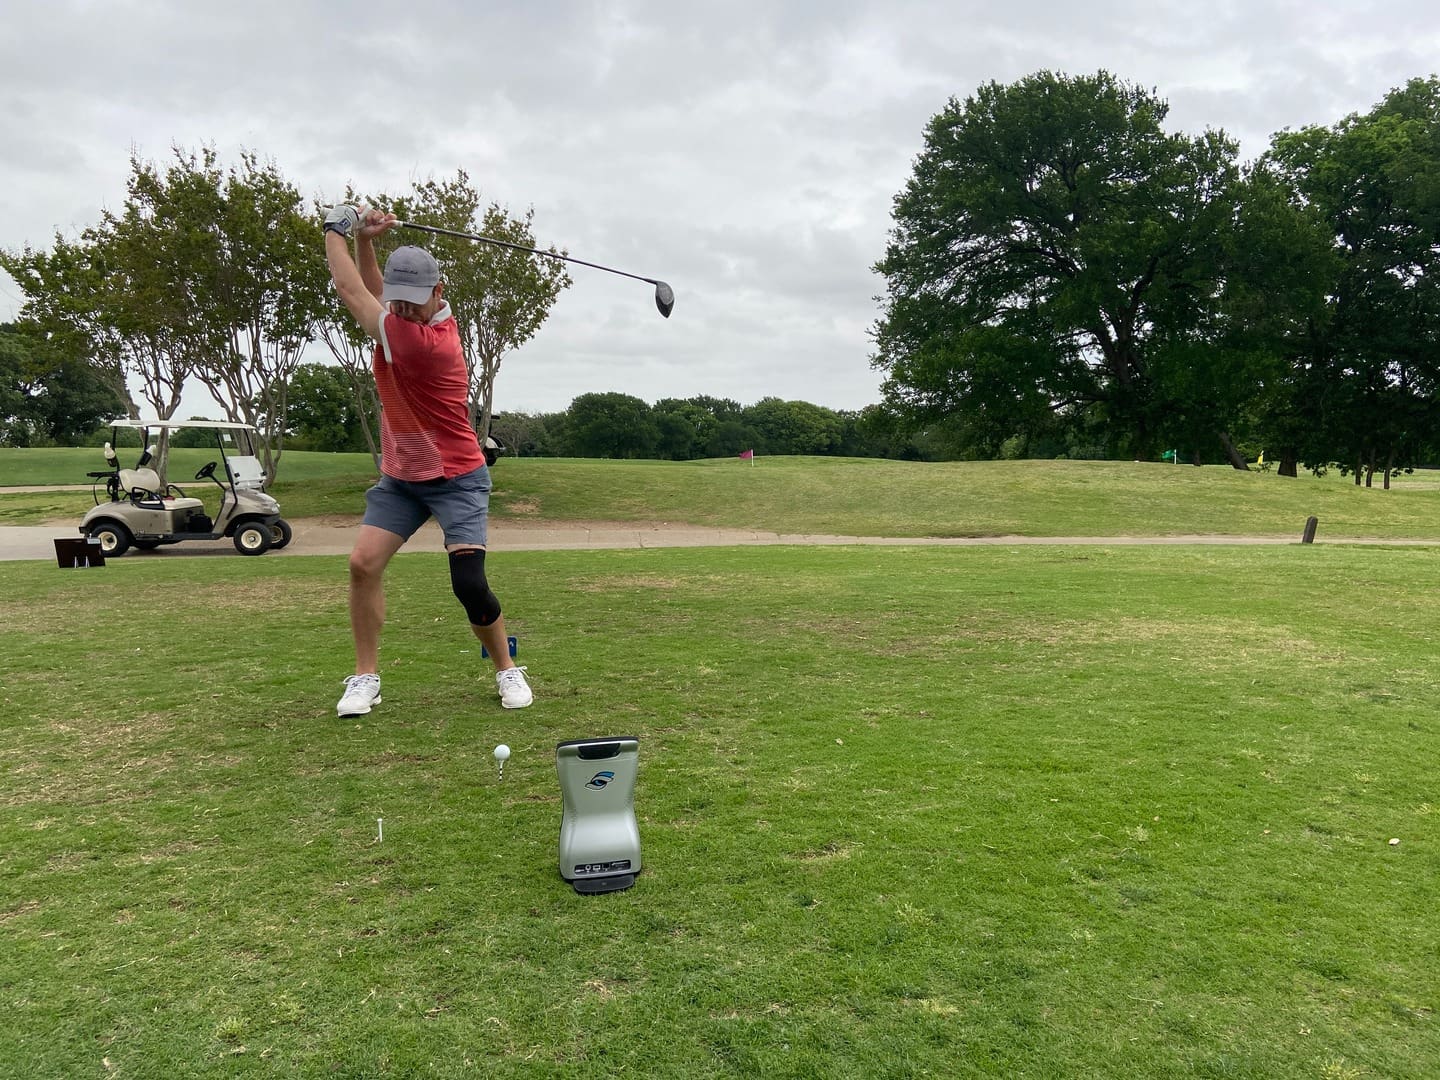 person playing golf in mid-swing